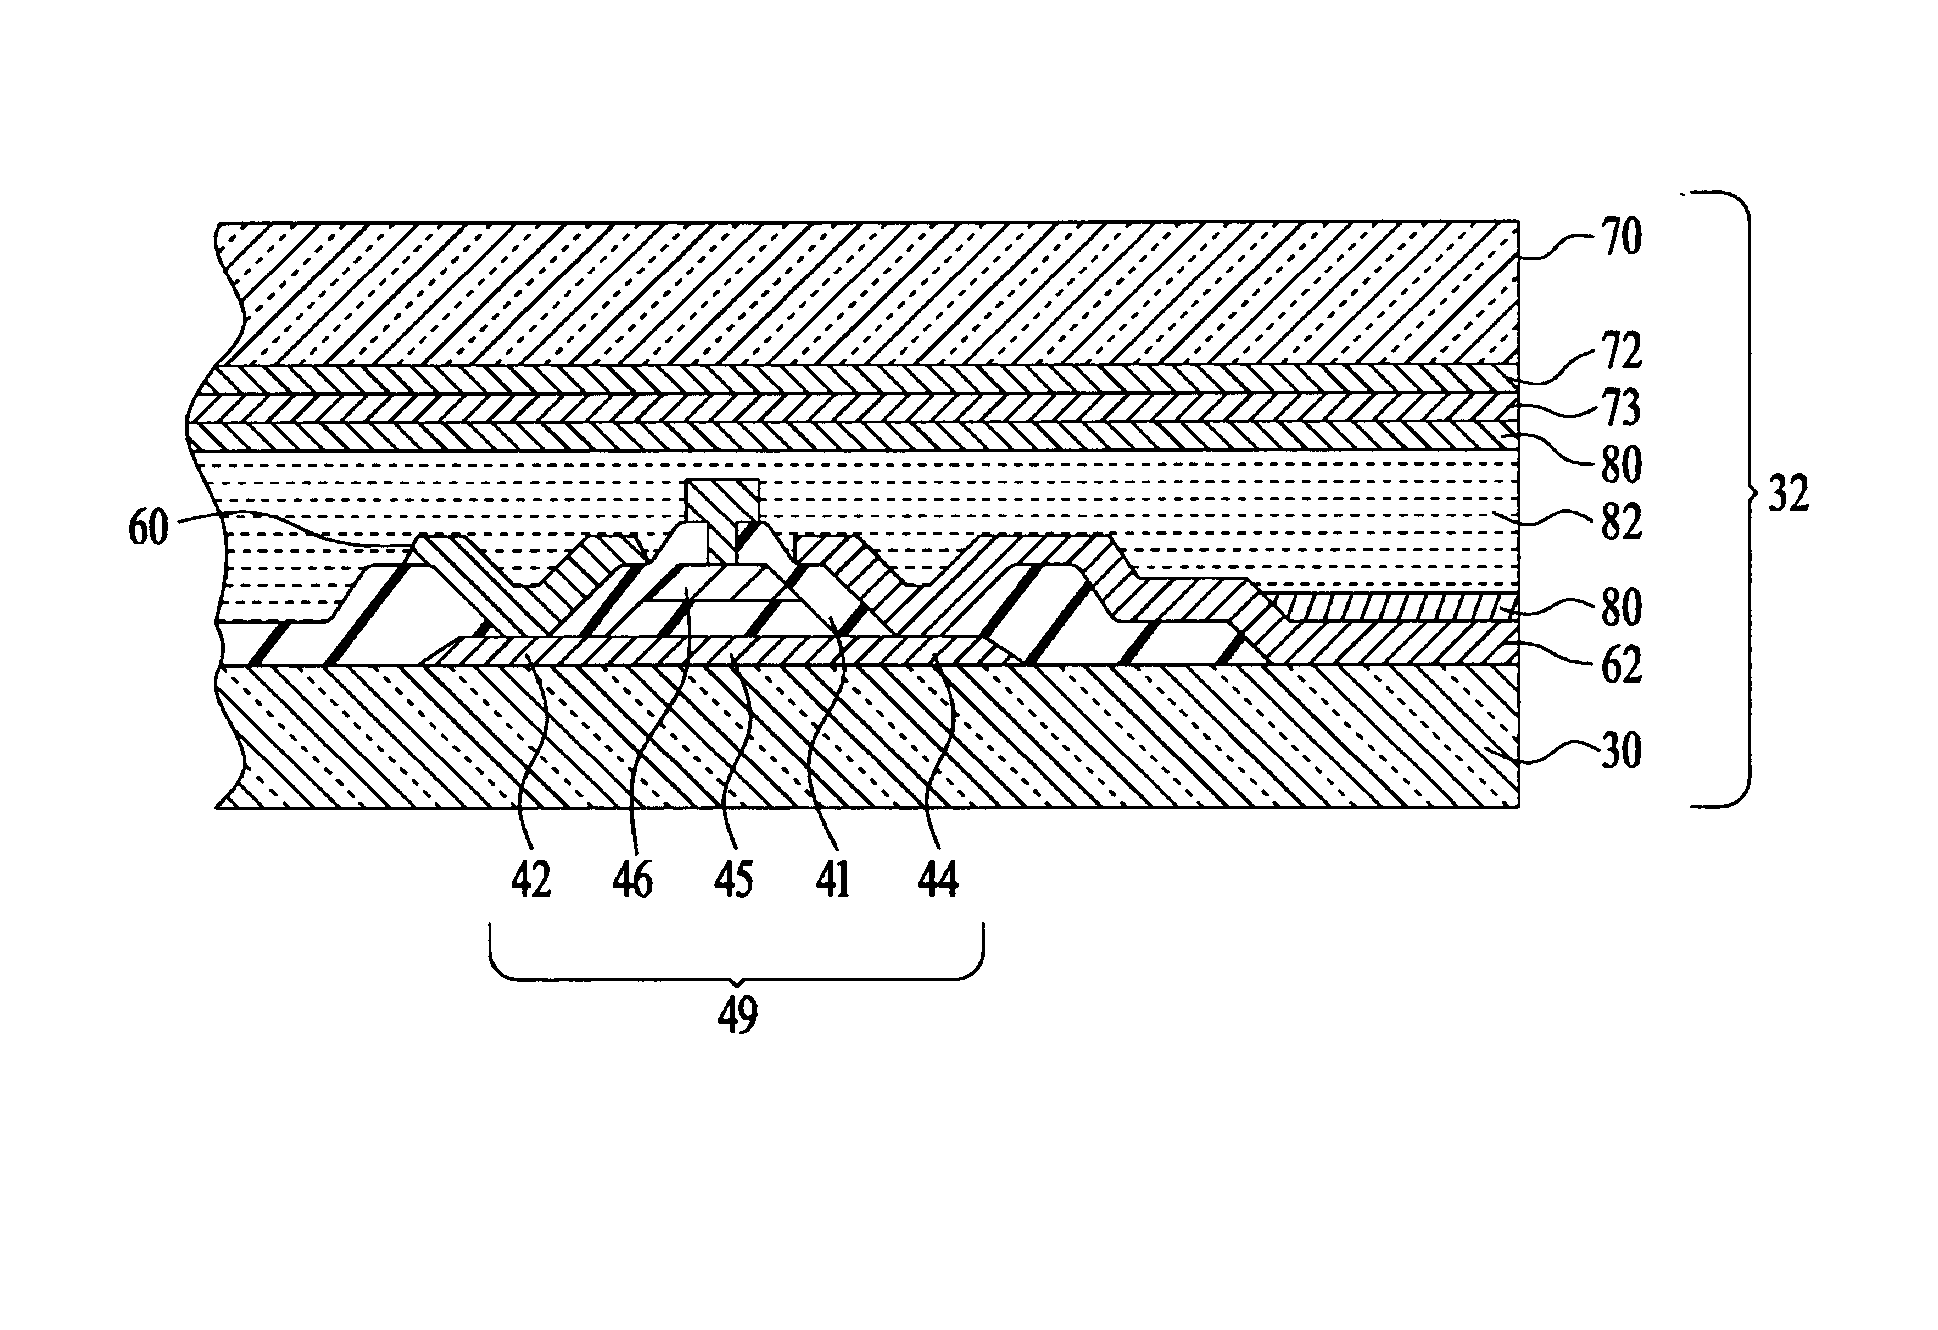 Silicon-on-sapphire display with audio transducer and method of fabricating same